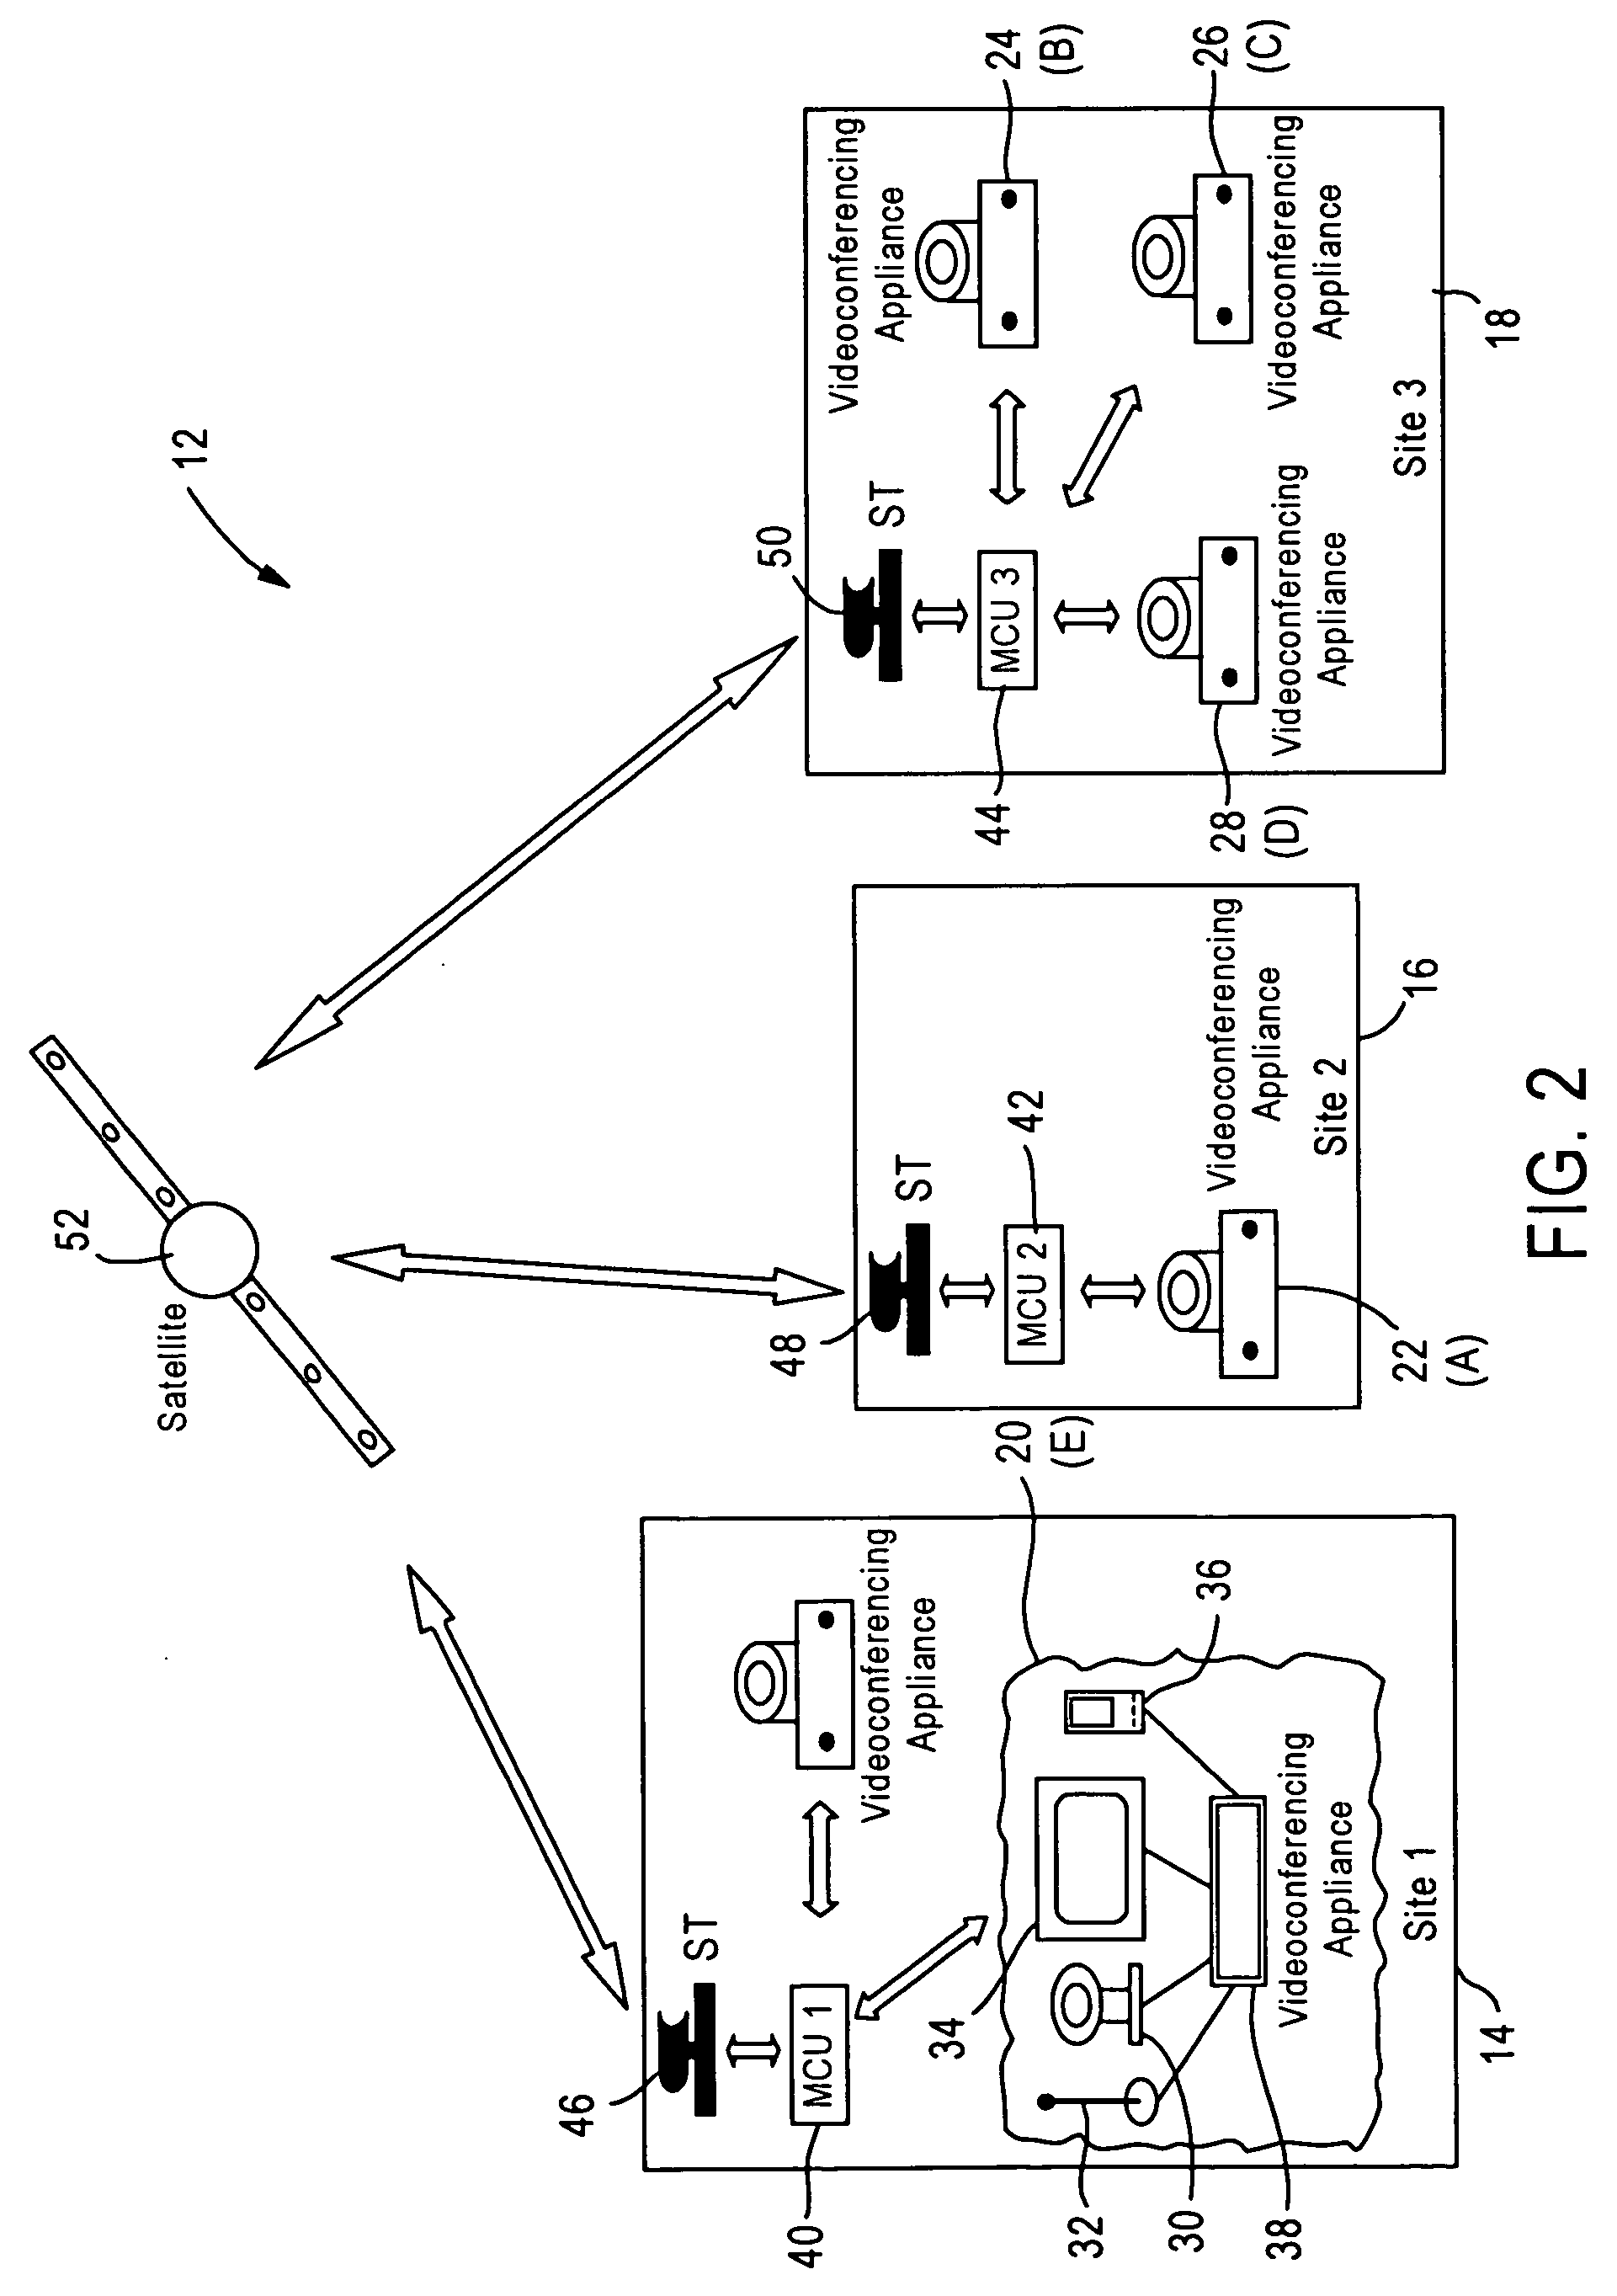 Stitching of video for continuous presence multipoint video conferencing